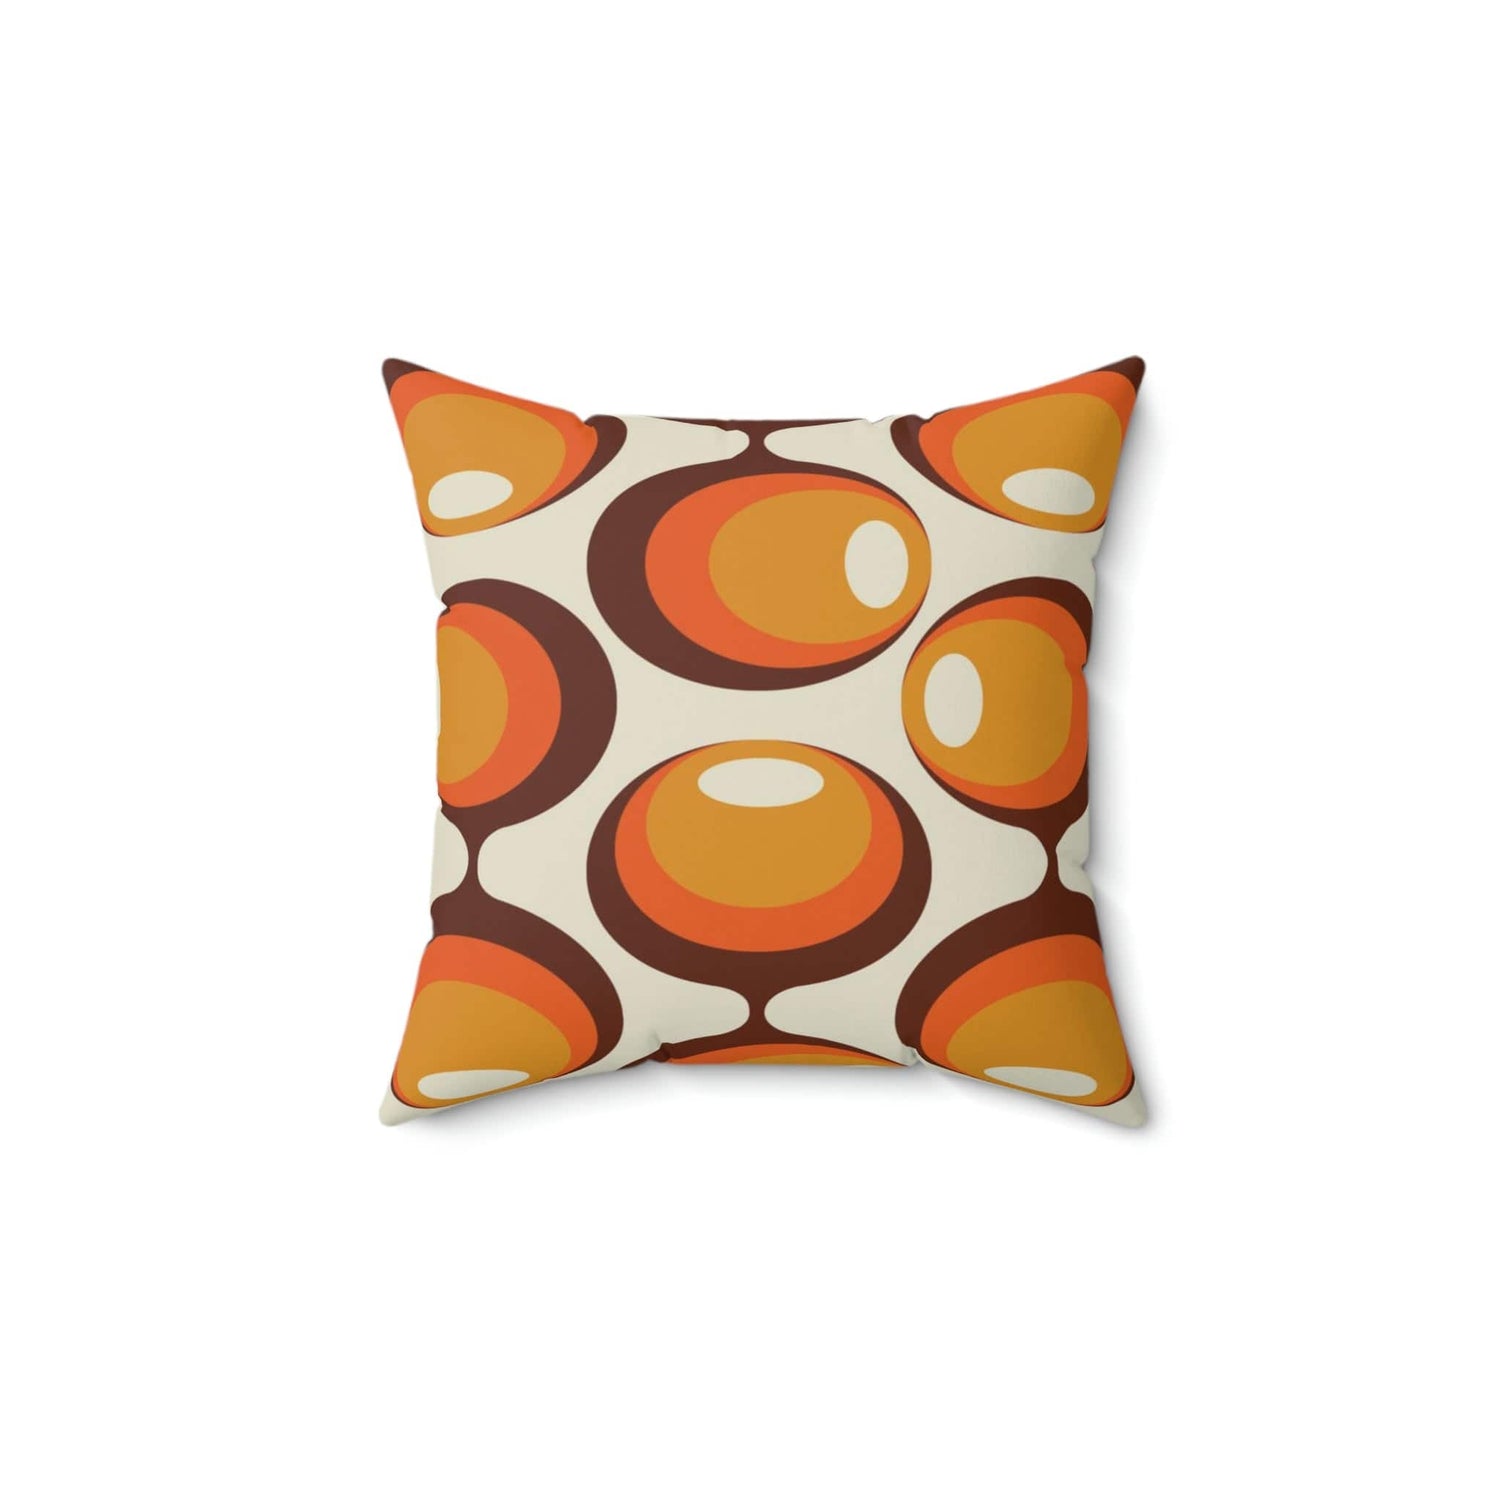 Kate McEnroe New York Geometric Groovy Orbs Throw Pillow Cover Throw Pillow Covers 14&quot; × 14&quot; 30129503595929635382